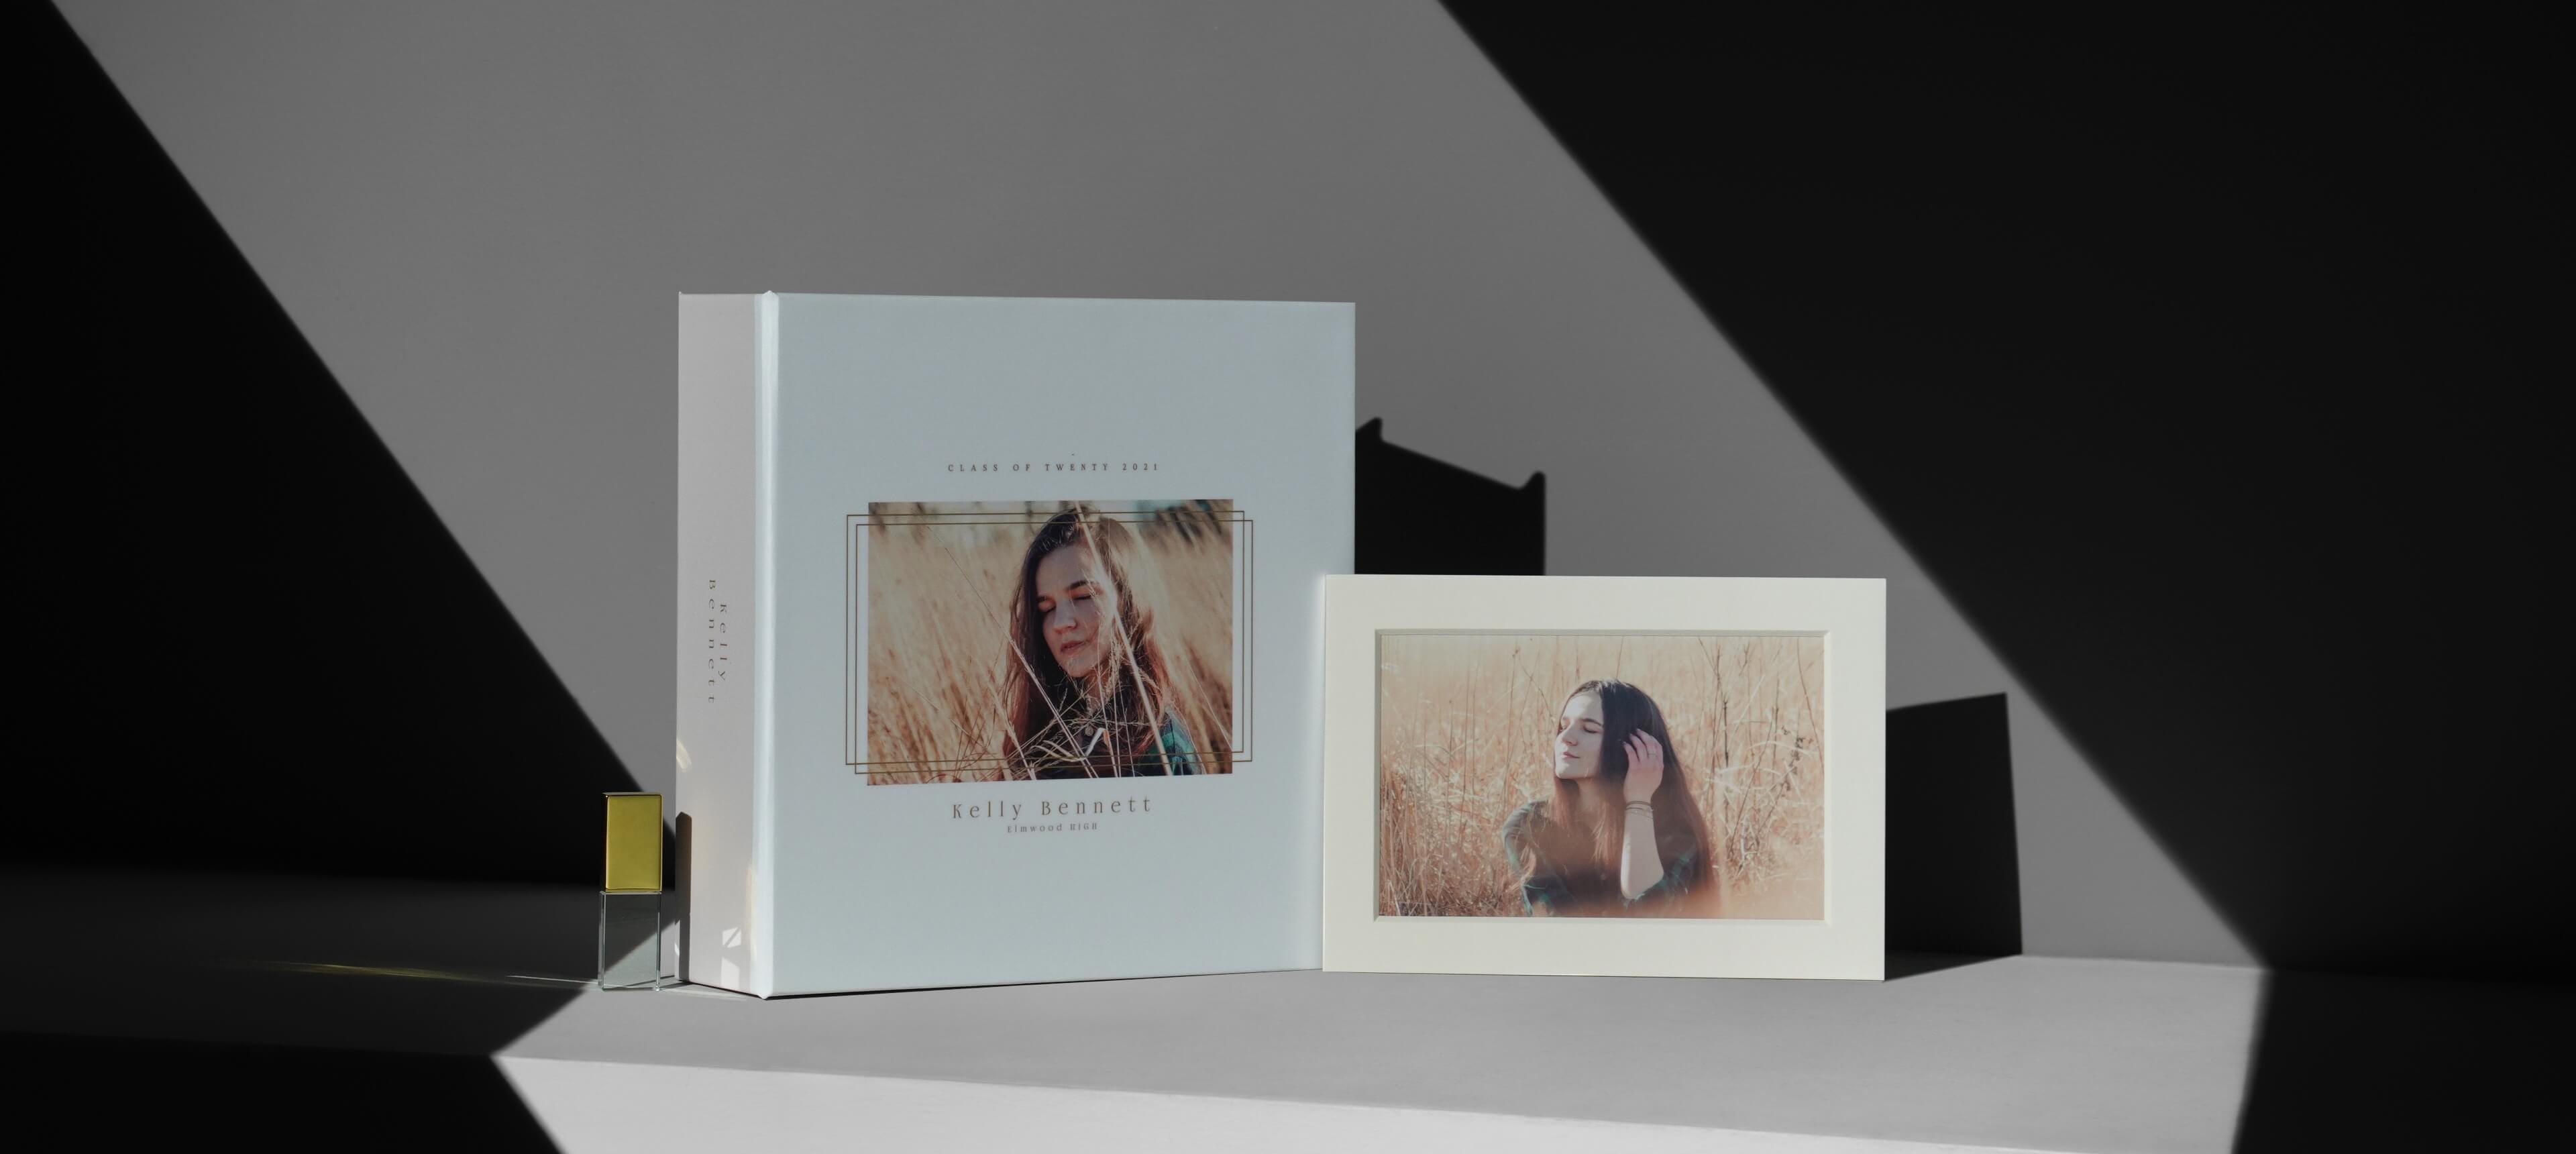 a image box set showing a matted photo and gold usb next to a box with a girl image printed on it